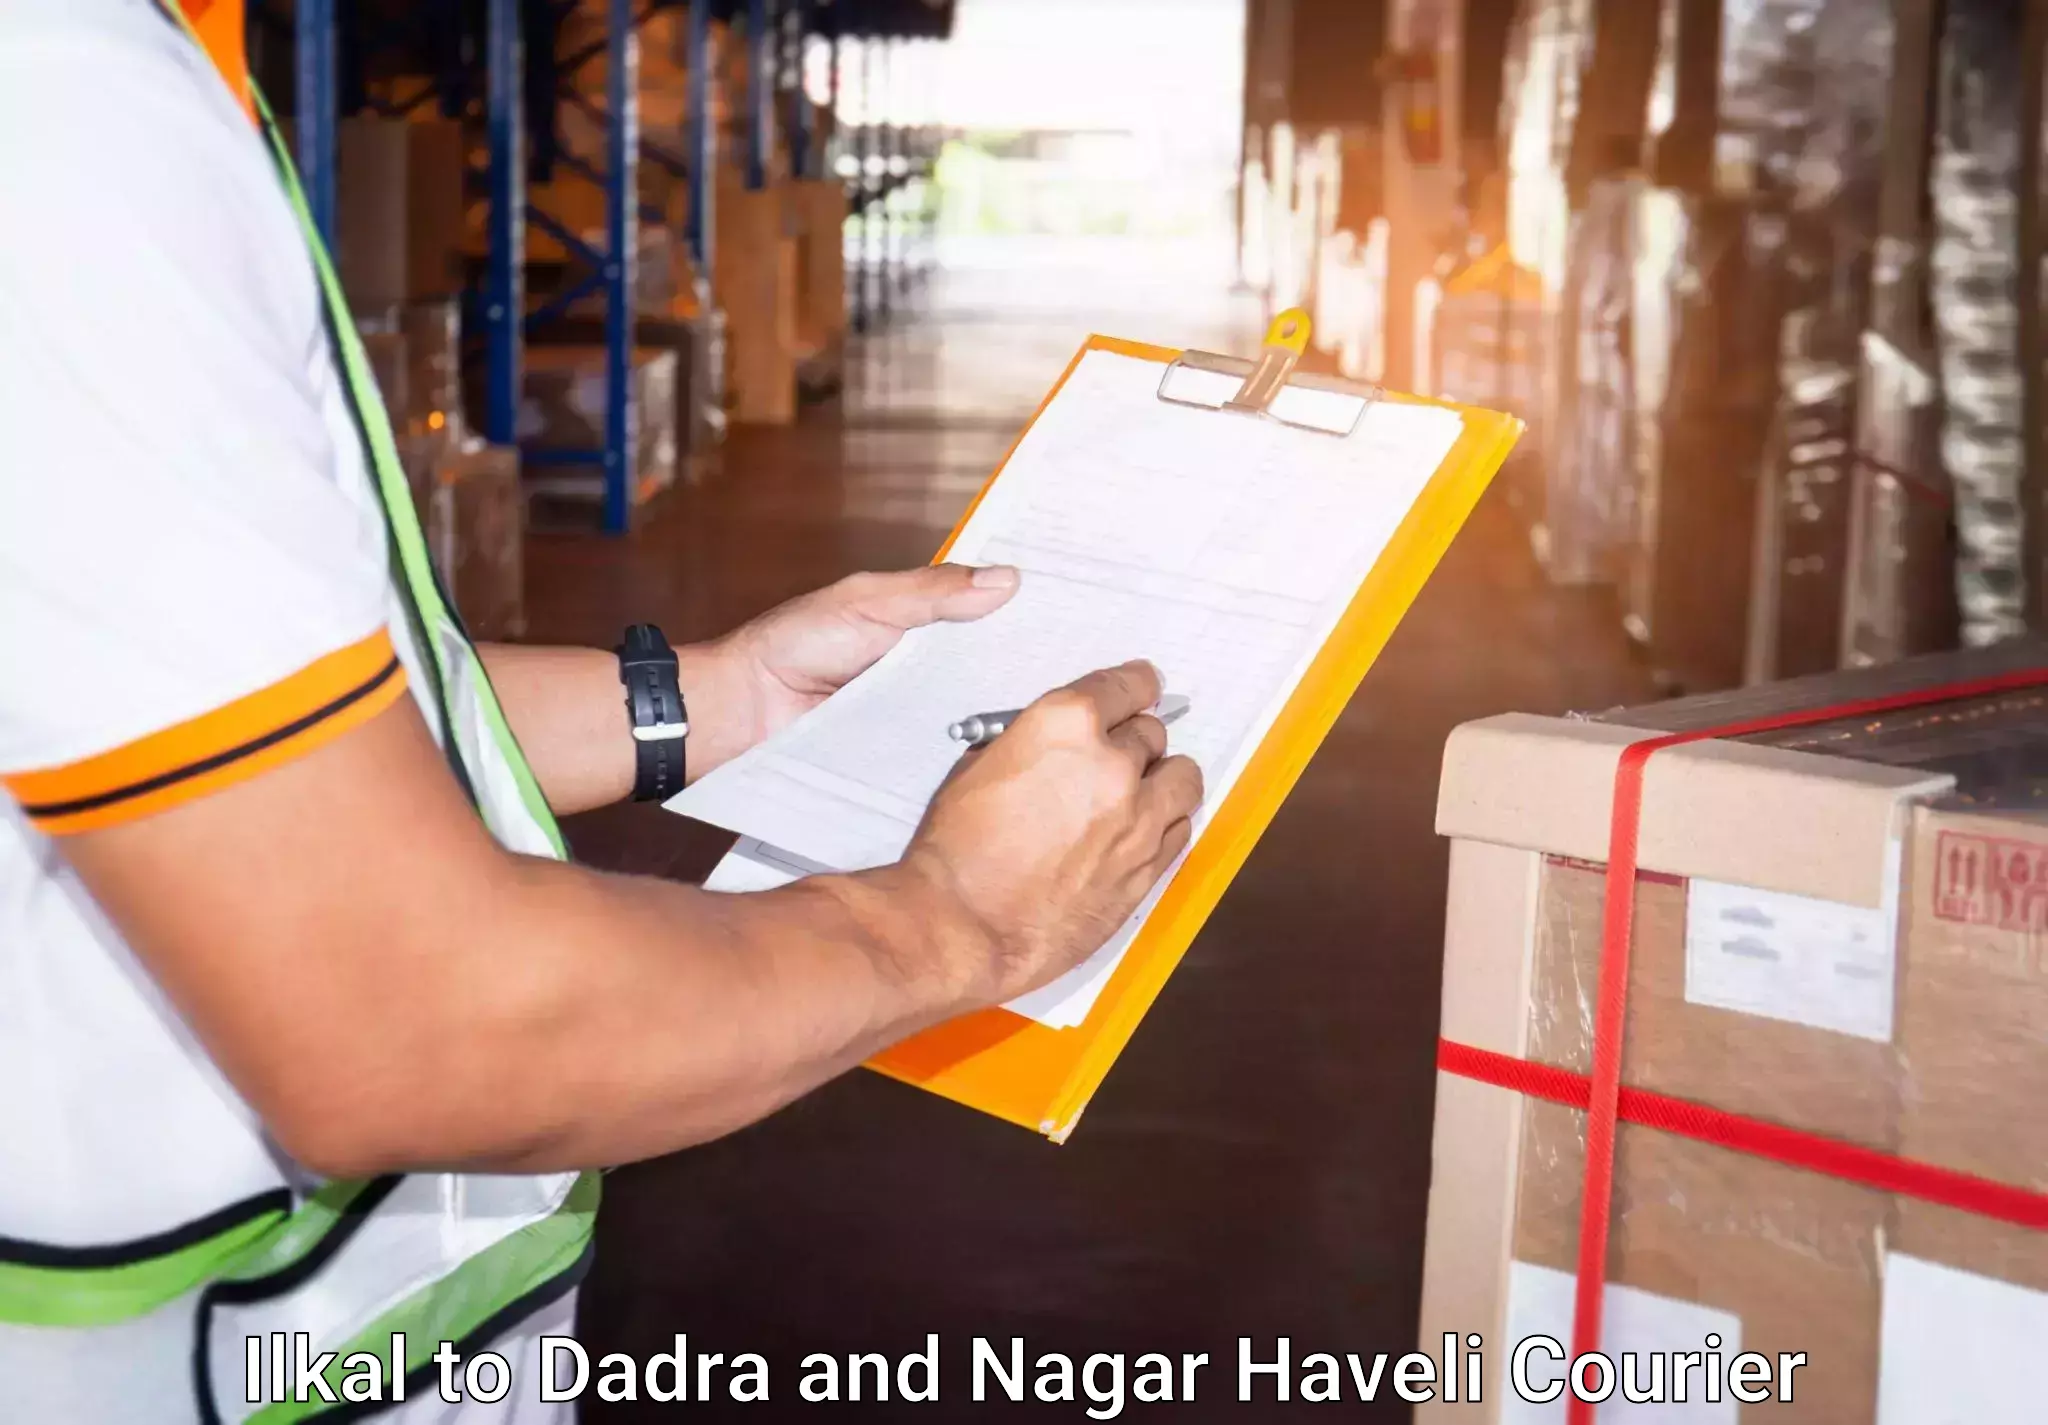 Emergency baggage service in Ilkal to Dadra and Nagar Haveli